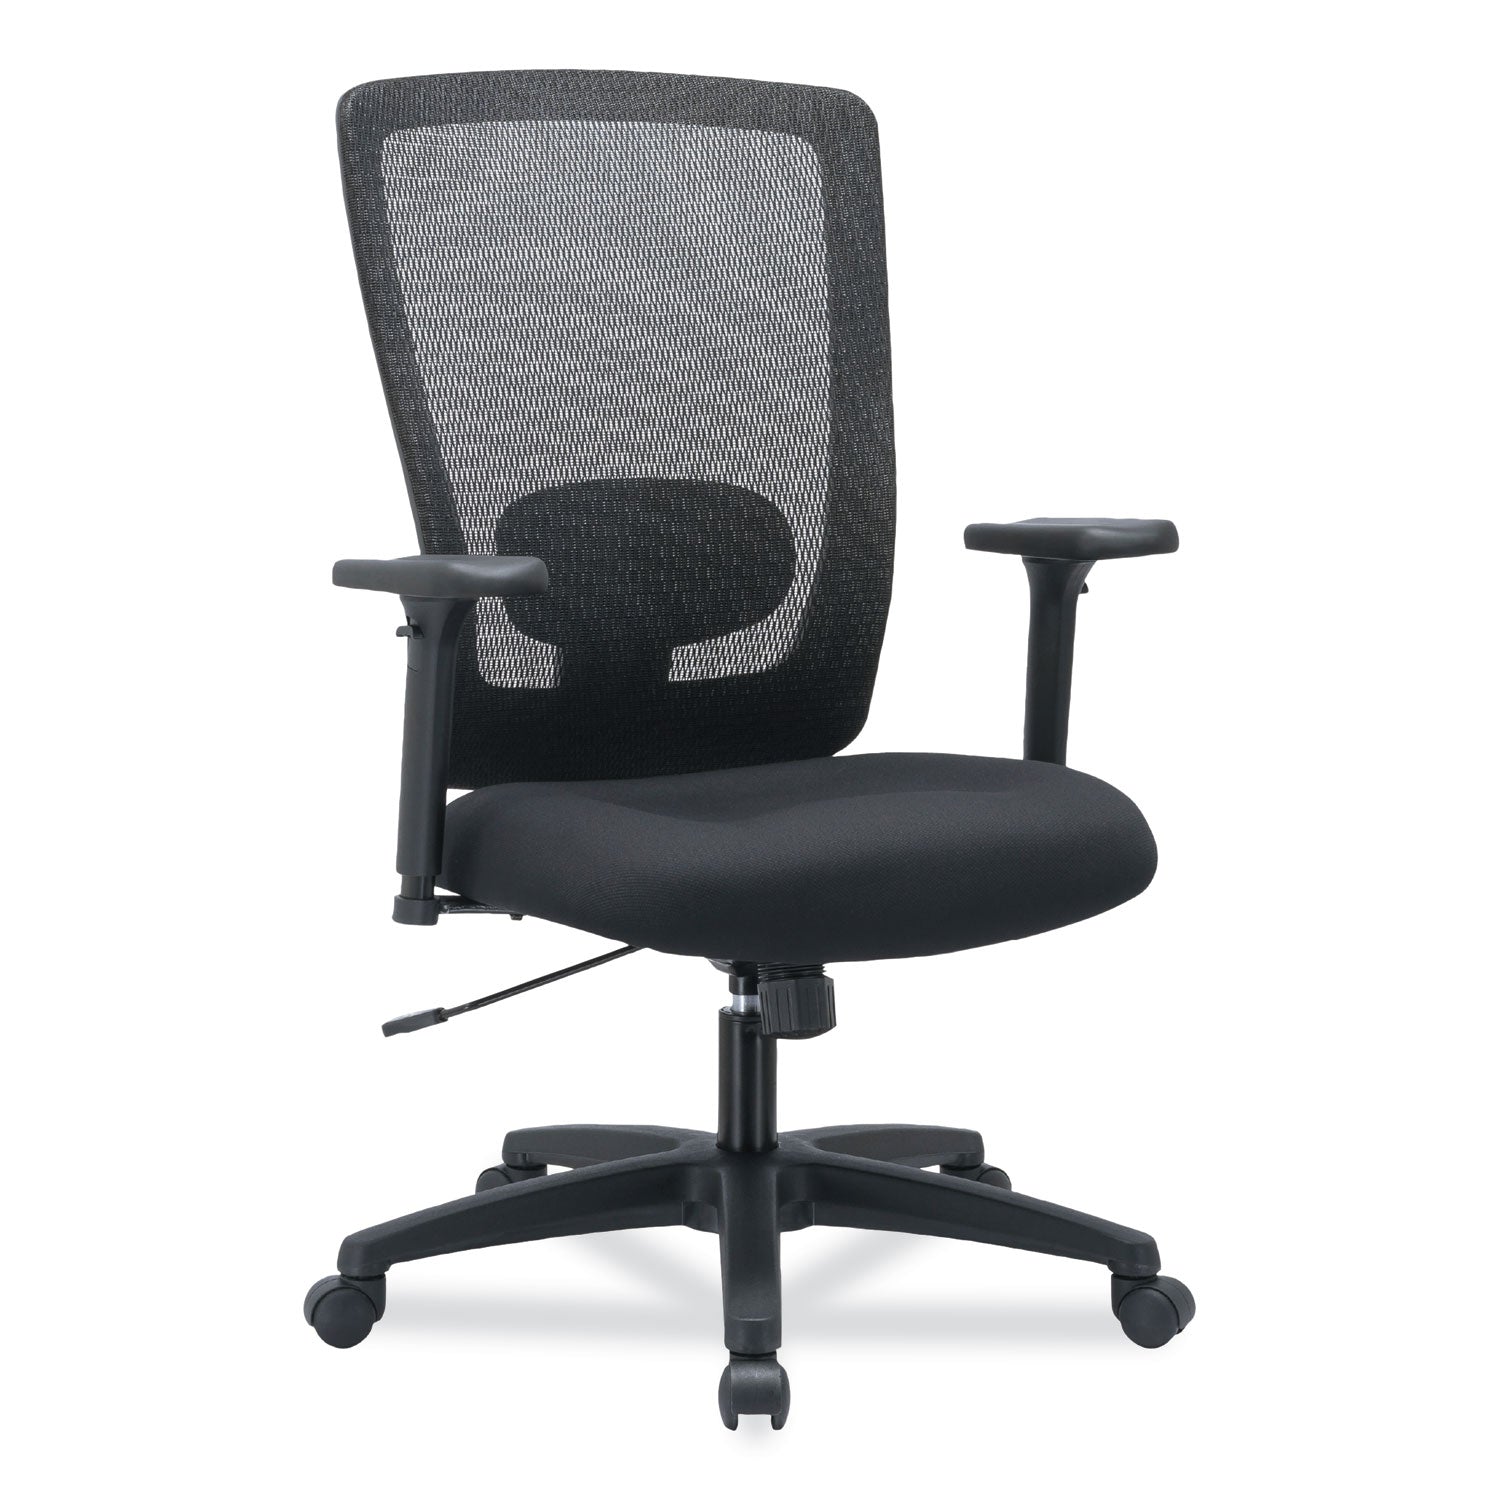 Alera Envy Series Mesh High-Back Swivel/Tilt Chair, Supports Up to 250 lb, 16.88" to 21.5" Seat Height, Black - 